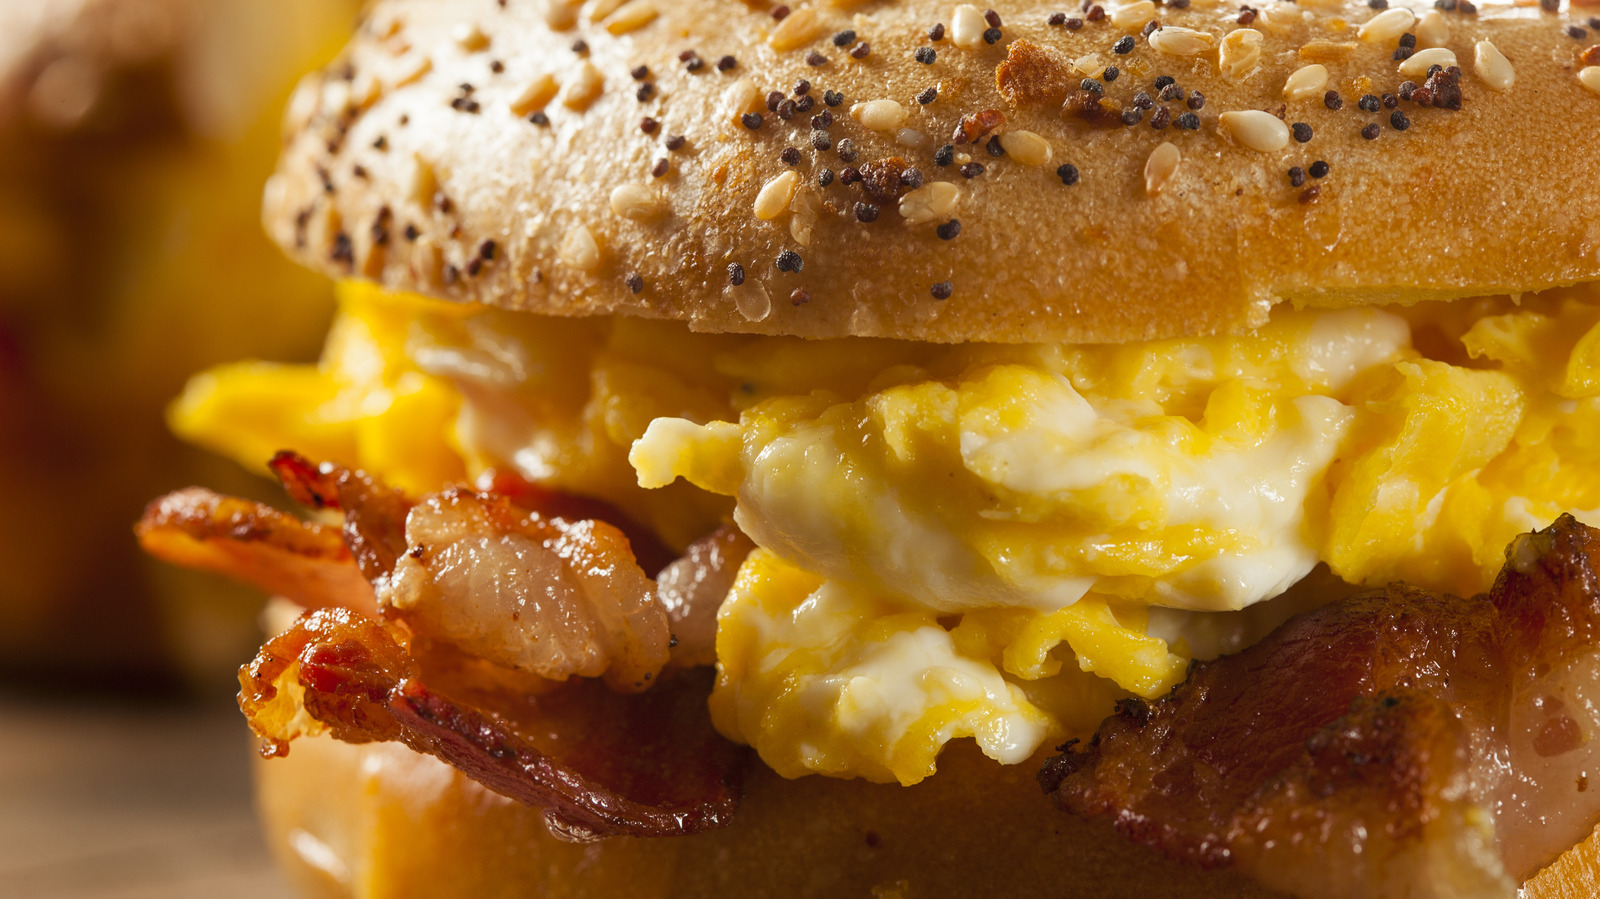 https://www.thedailymeal.com/img/gallery/the-best-fast-food-breakfast-sandwiches-ranked/l-intro-1671147212.jpg